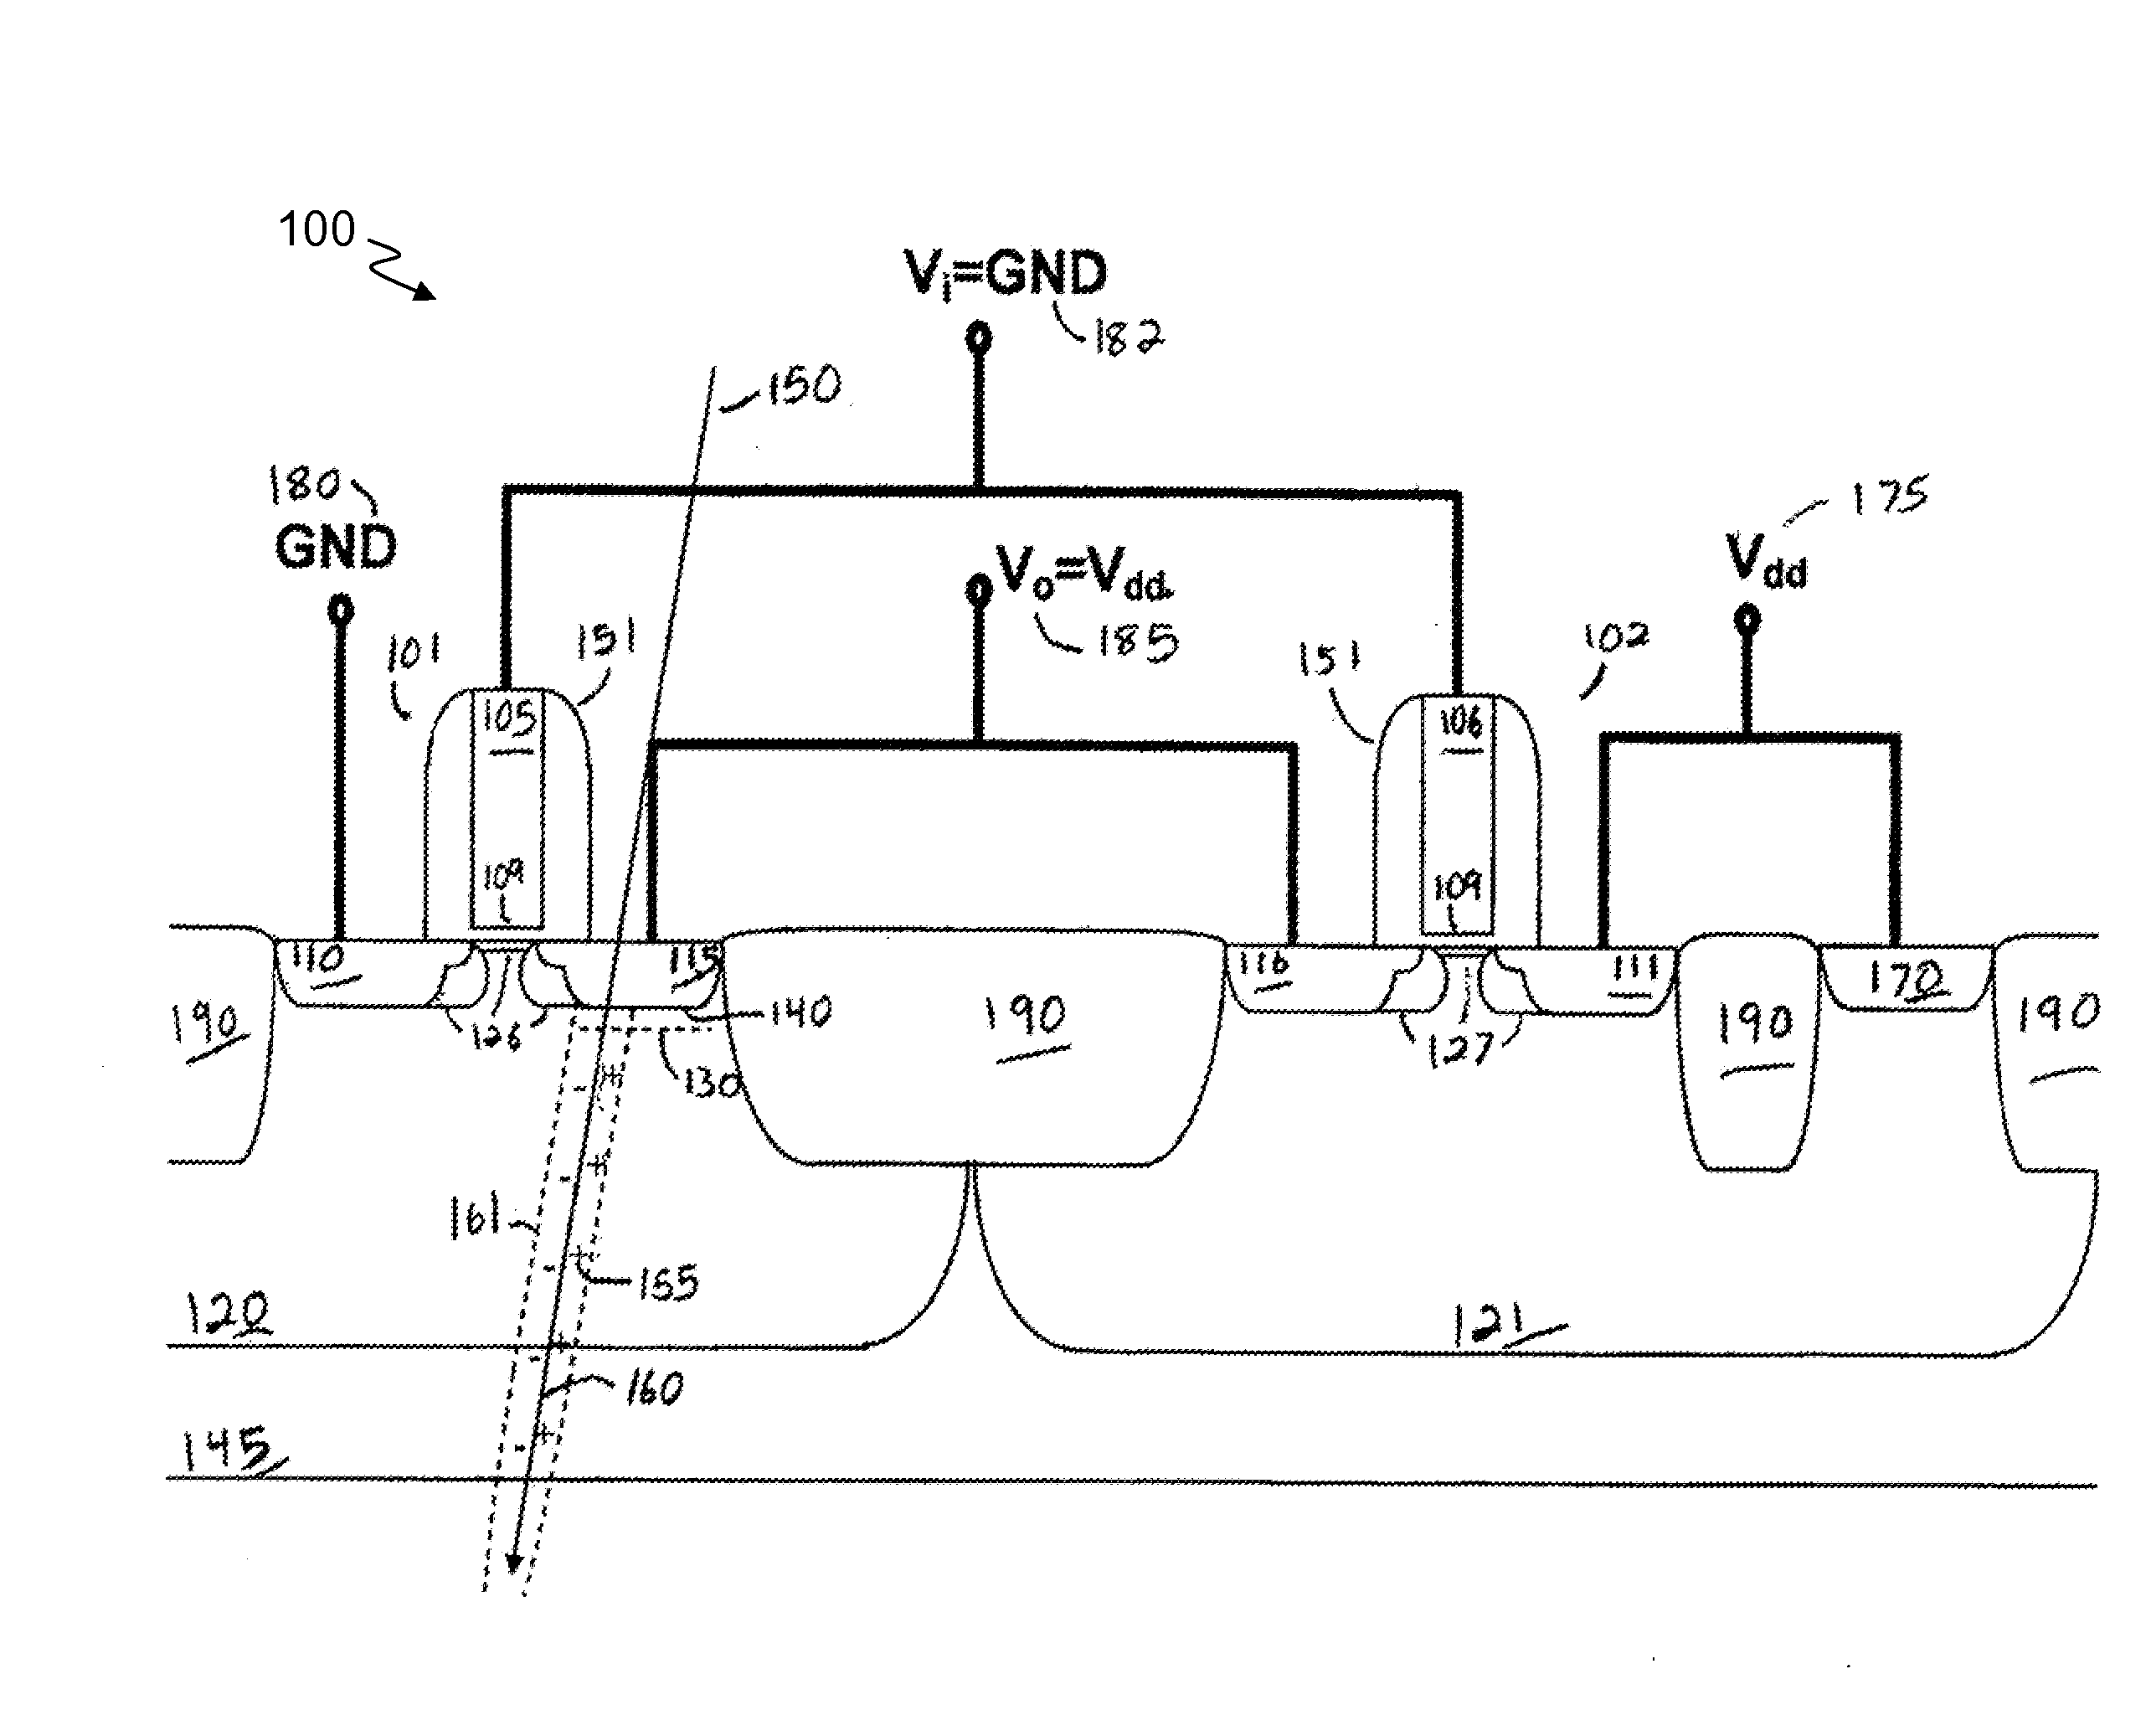 Method of manufacturing a CMOS device with zero soft error rate